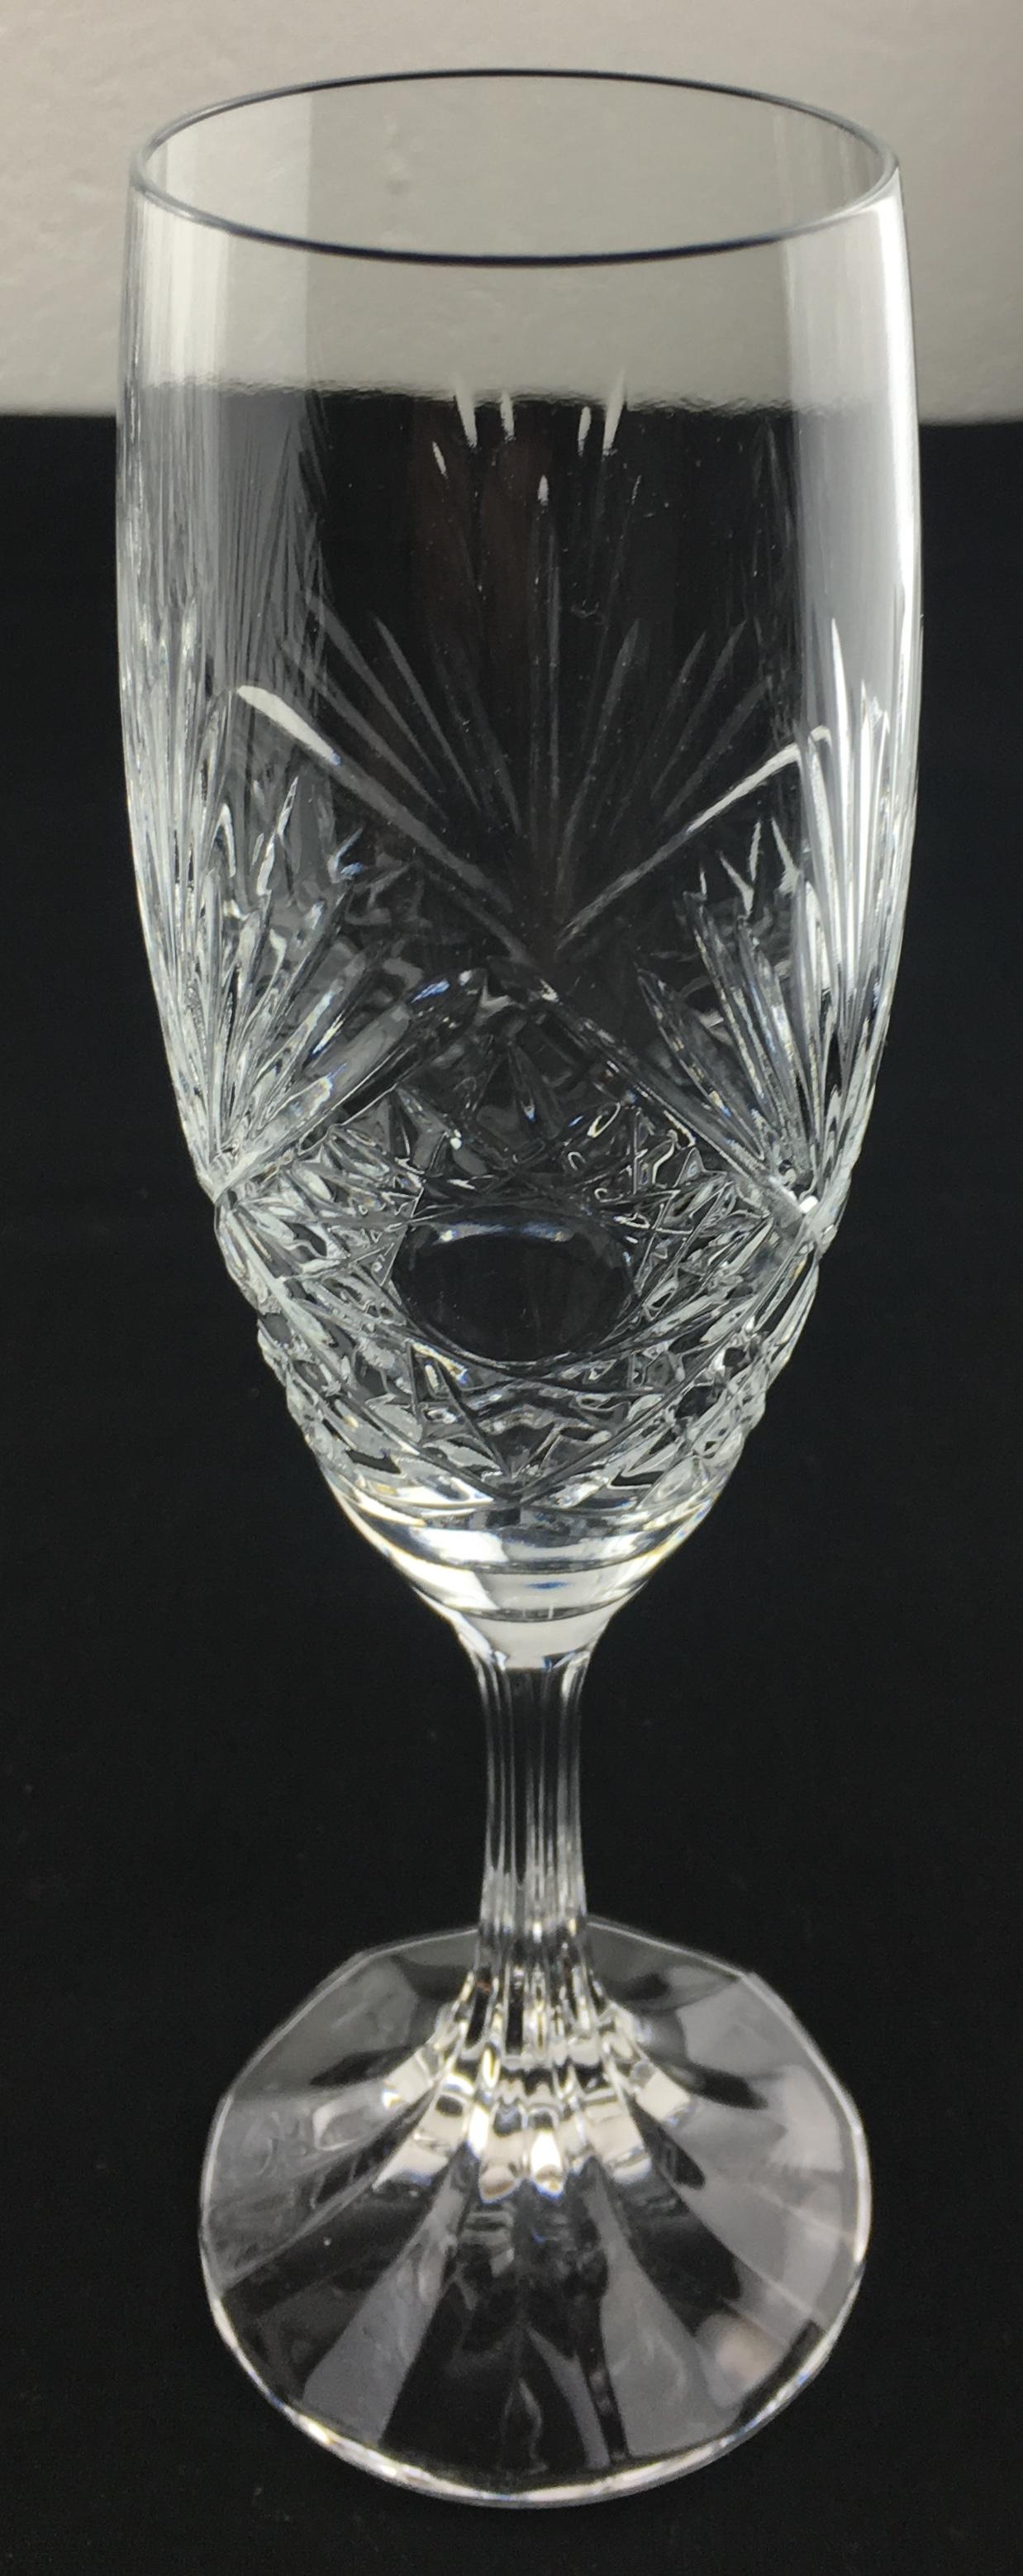 Exquisite 12 Piece Baccarat Crystal Champagne Flutes 1